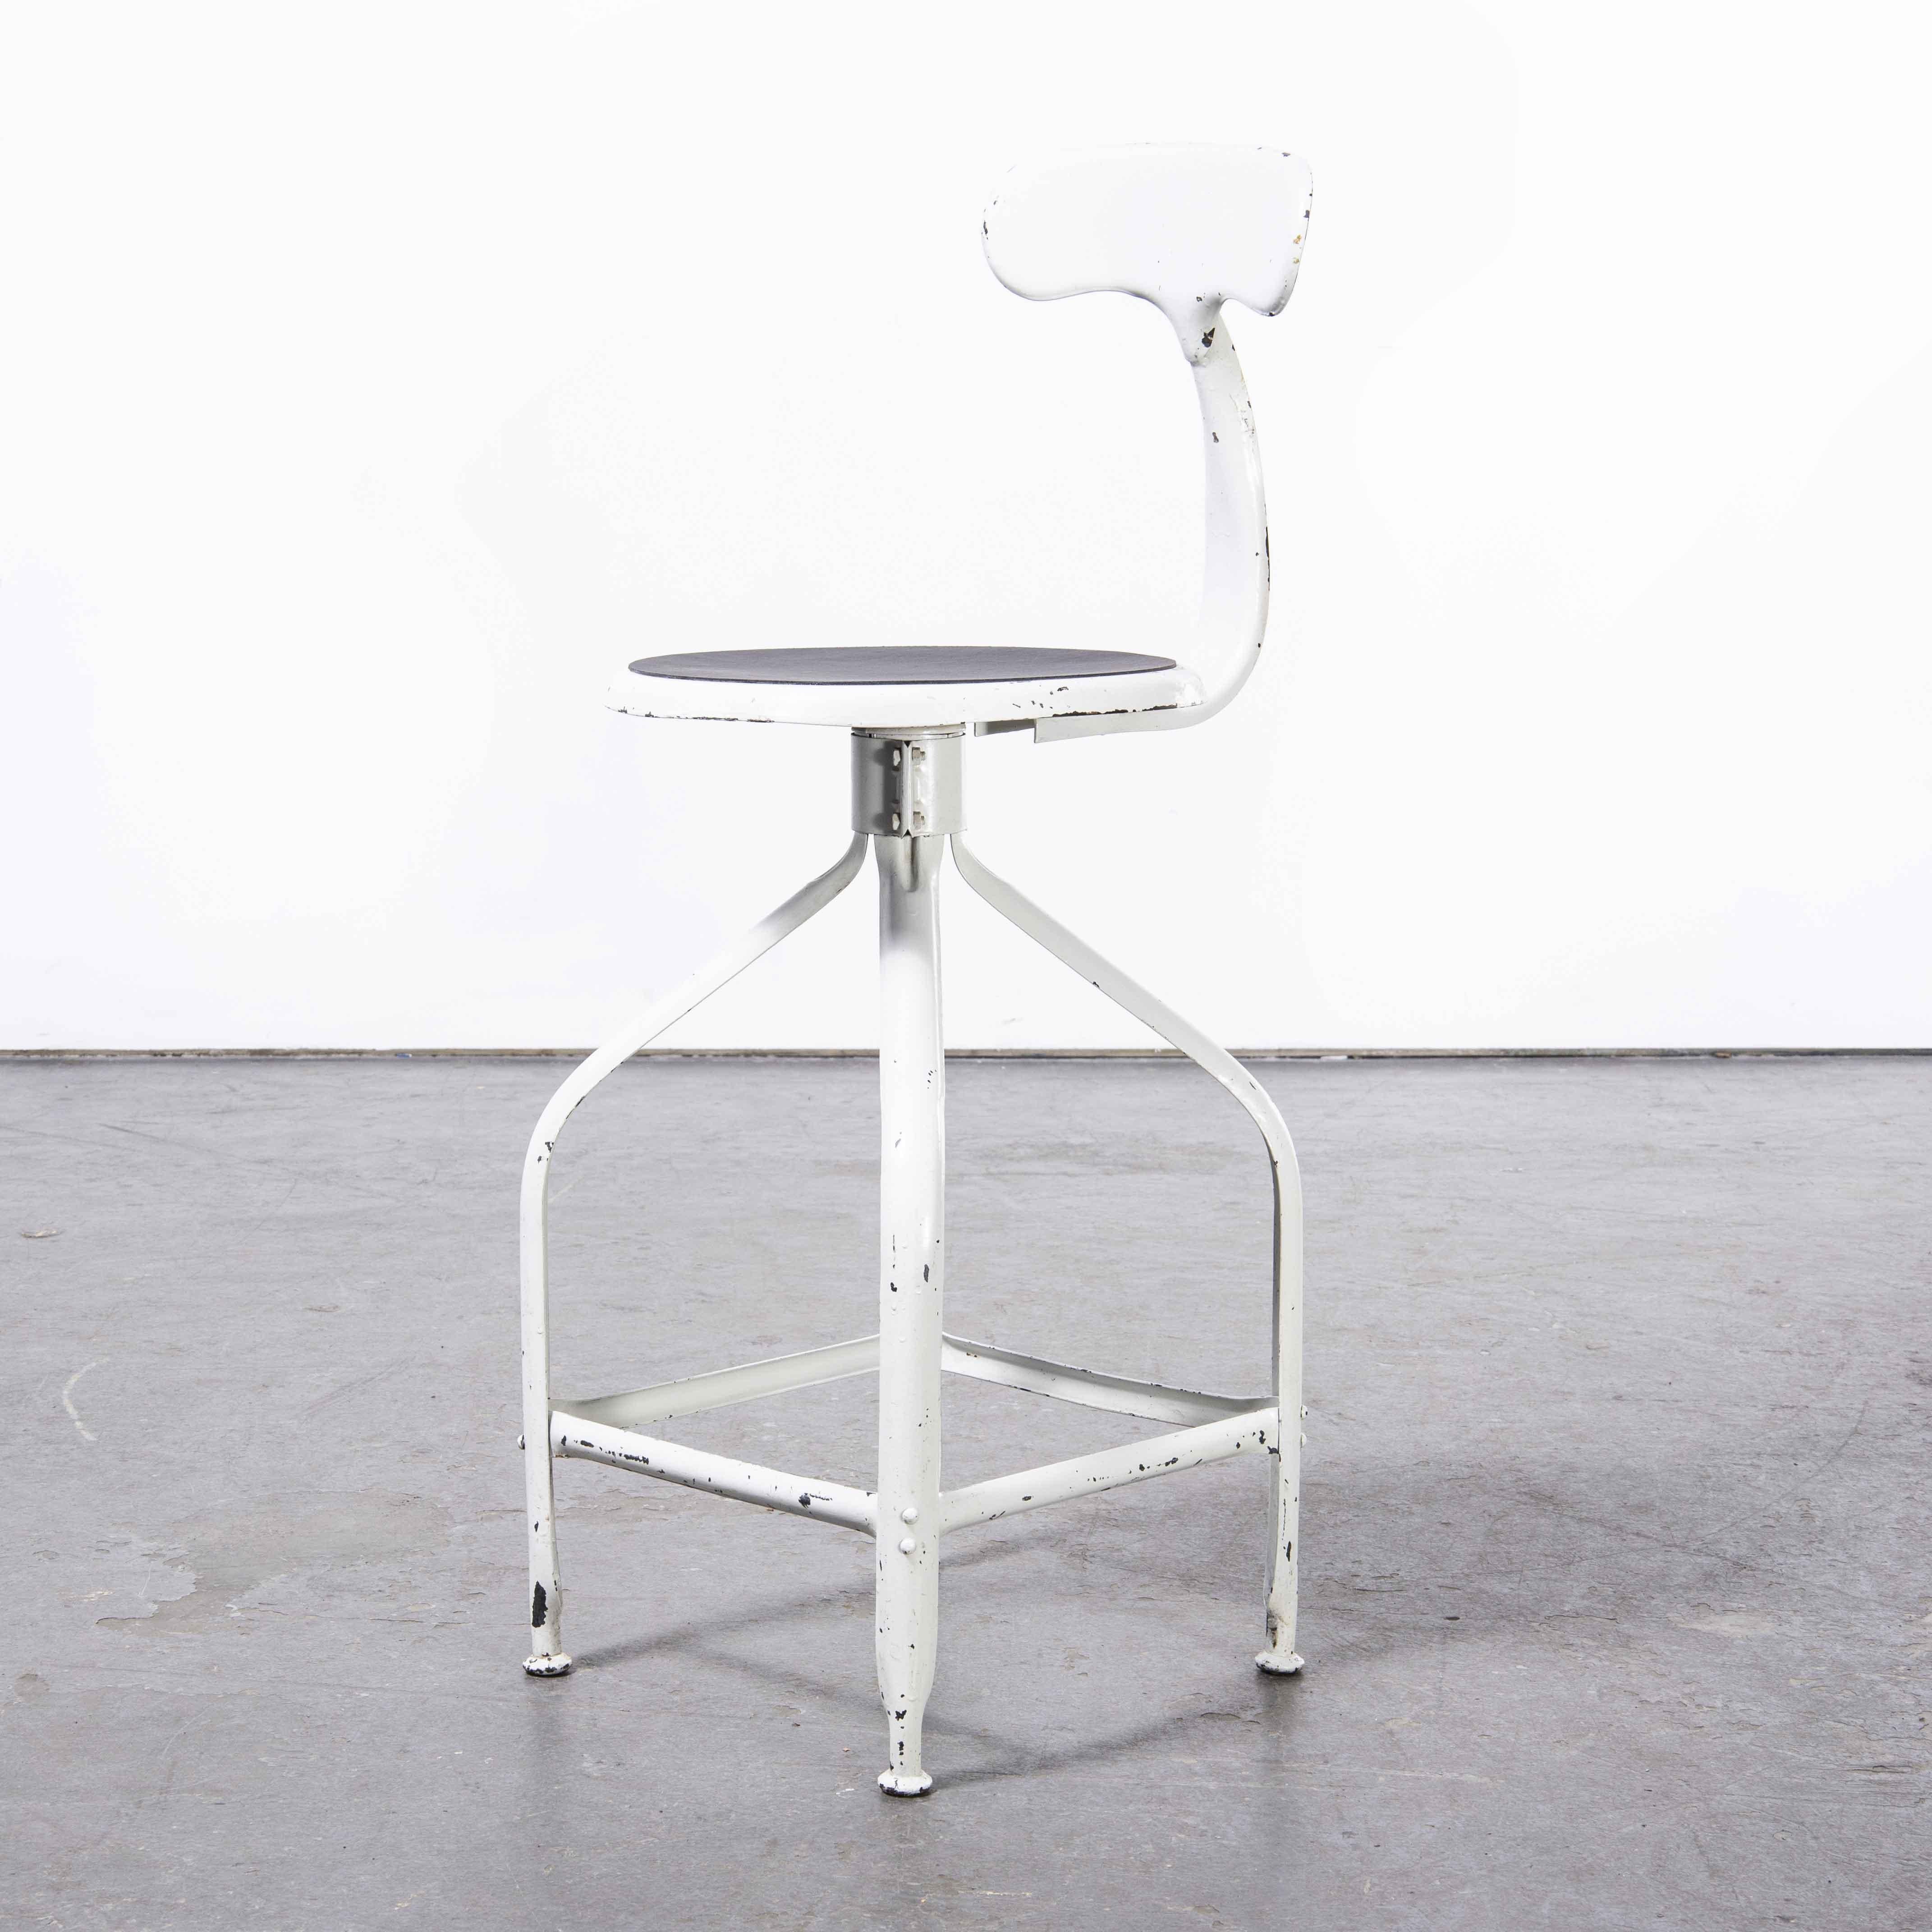 1950’s Original French white Nicolle industrial swivel chair

1950’s Original French Nicolle industrial swivel chair. One of our all time favourite products, exceptional in design with the minimal use of materials yet strong, well proportioned